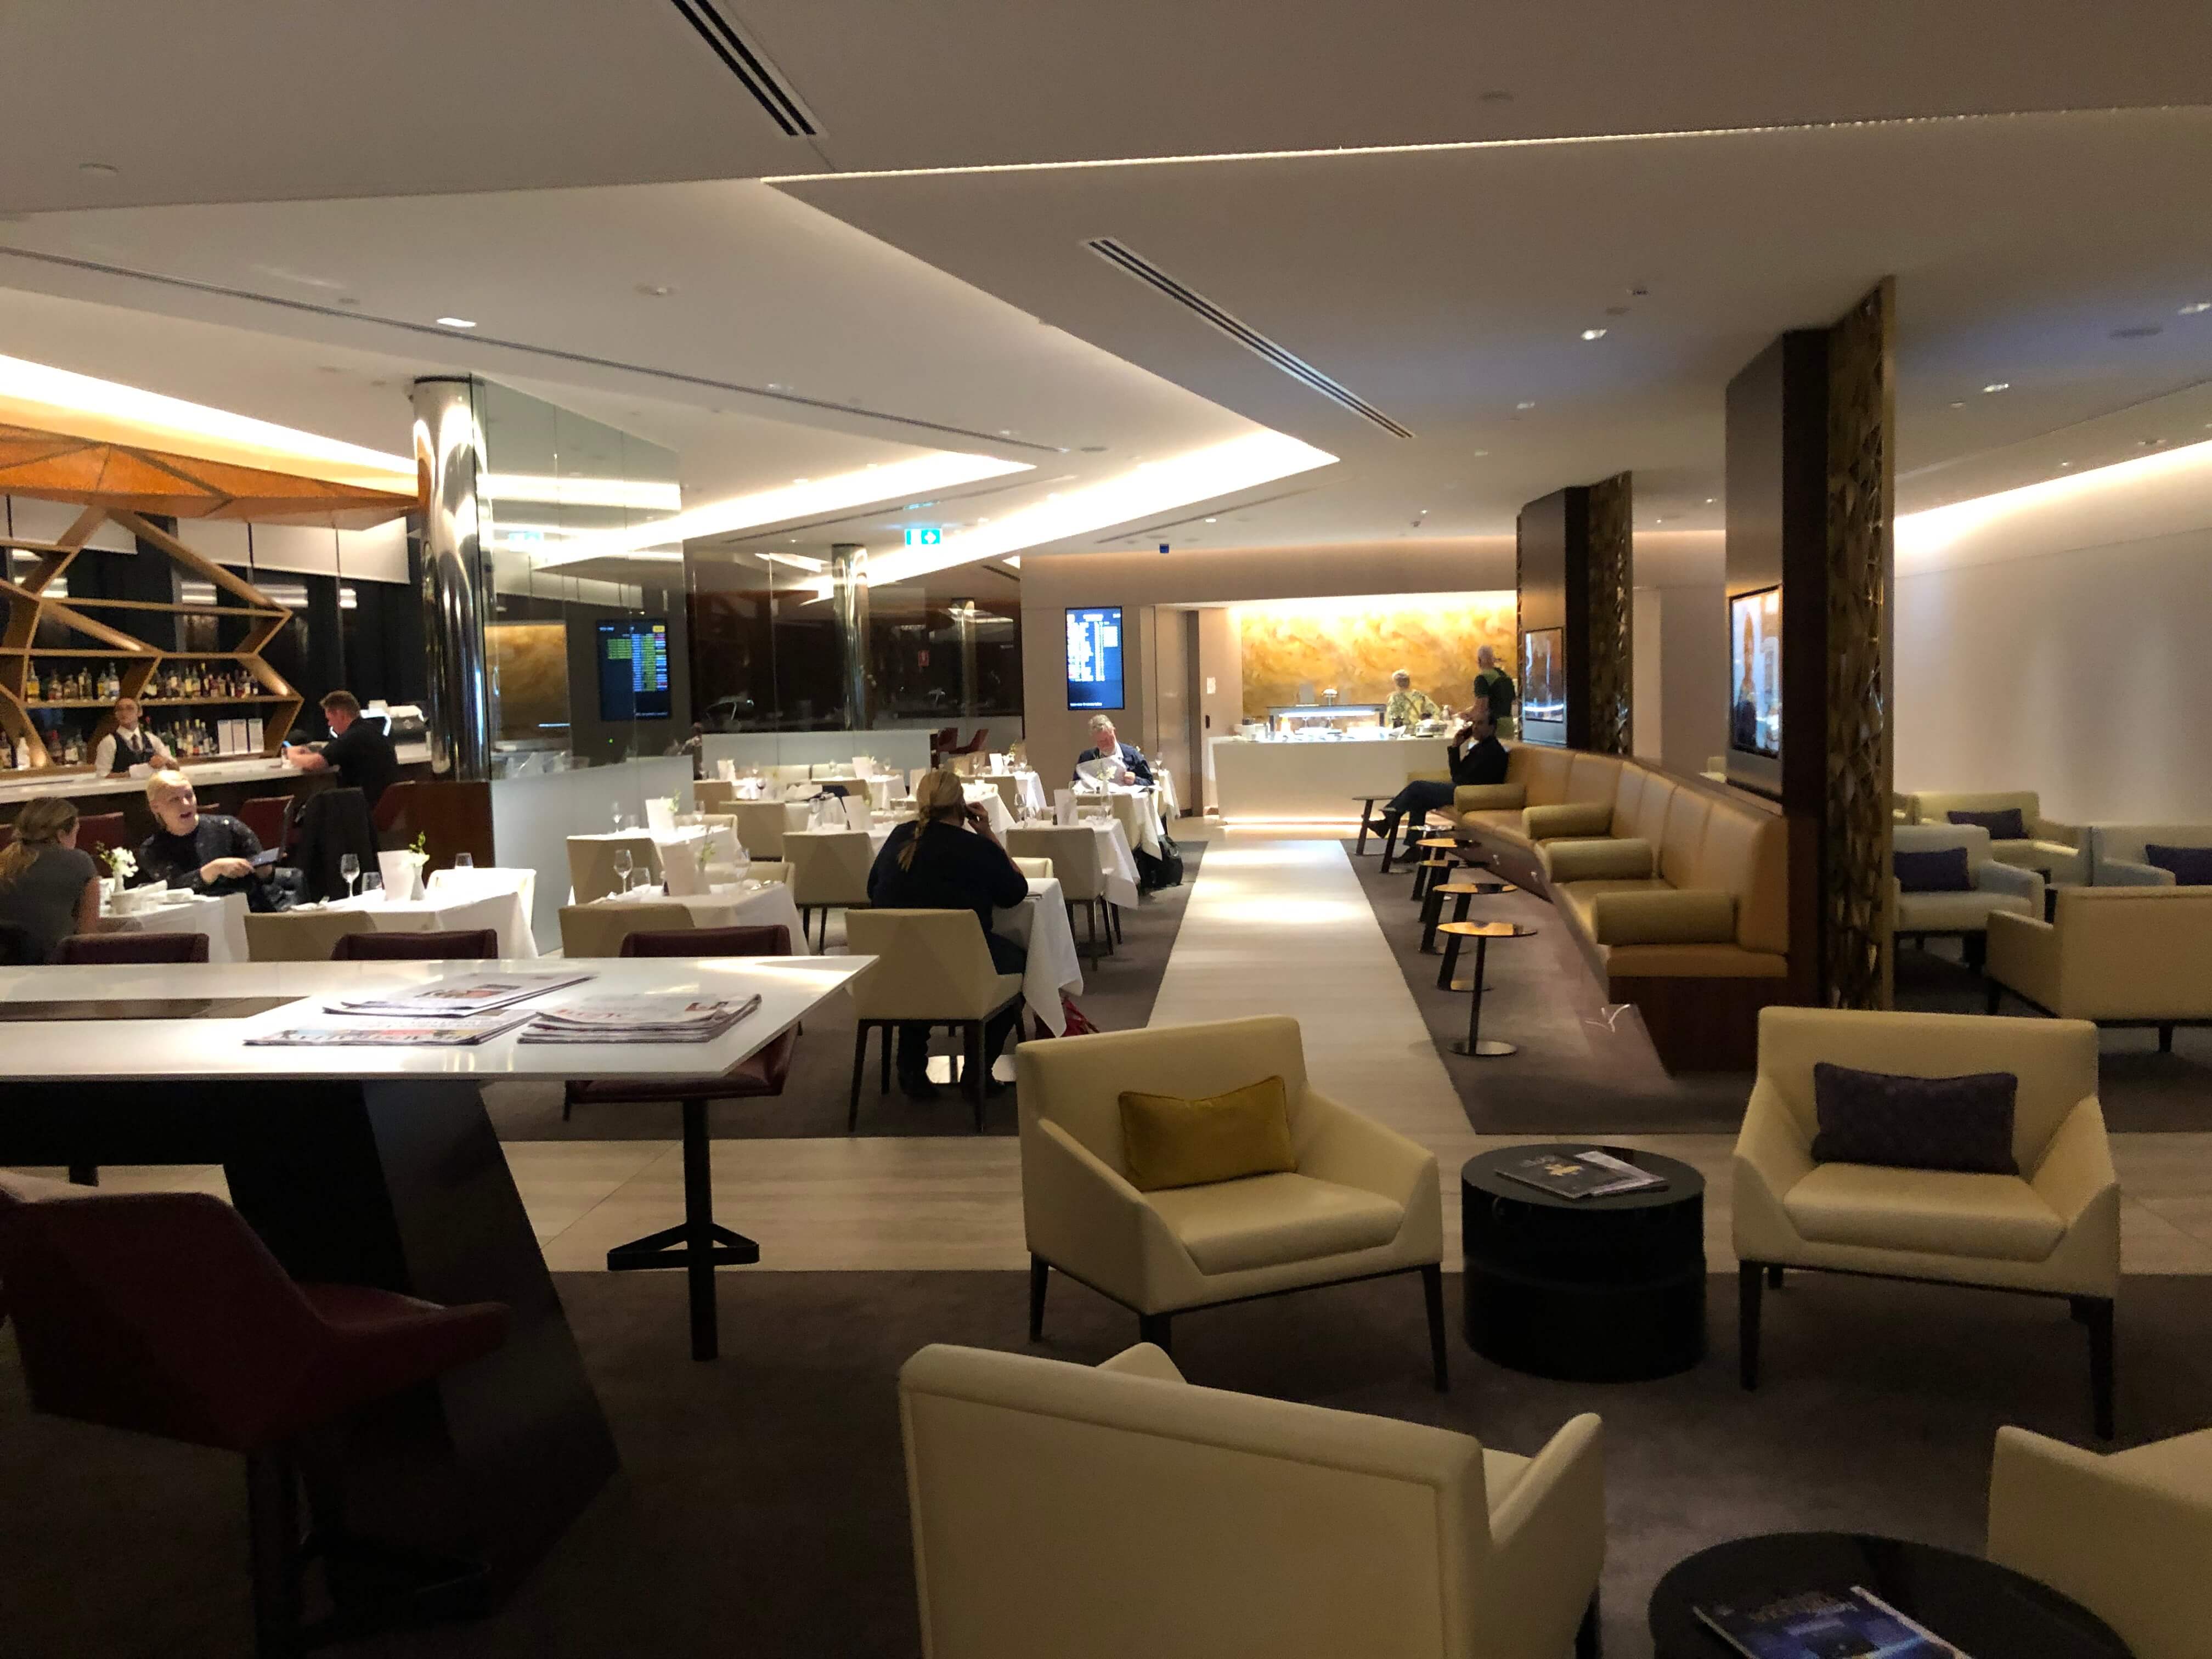 Seating at the centre of the lounge include dining tables and bar style seats